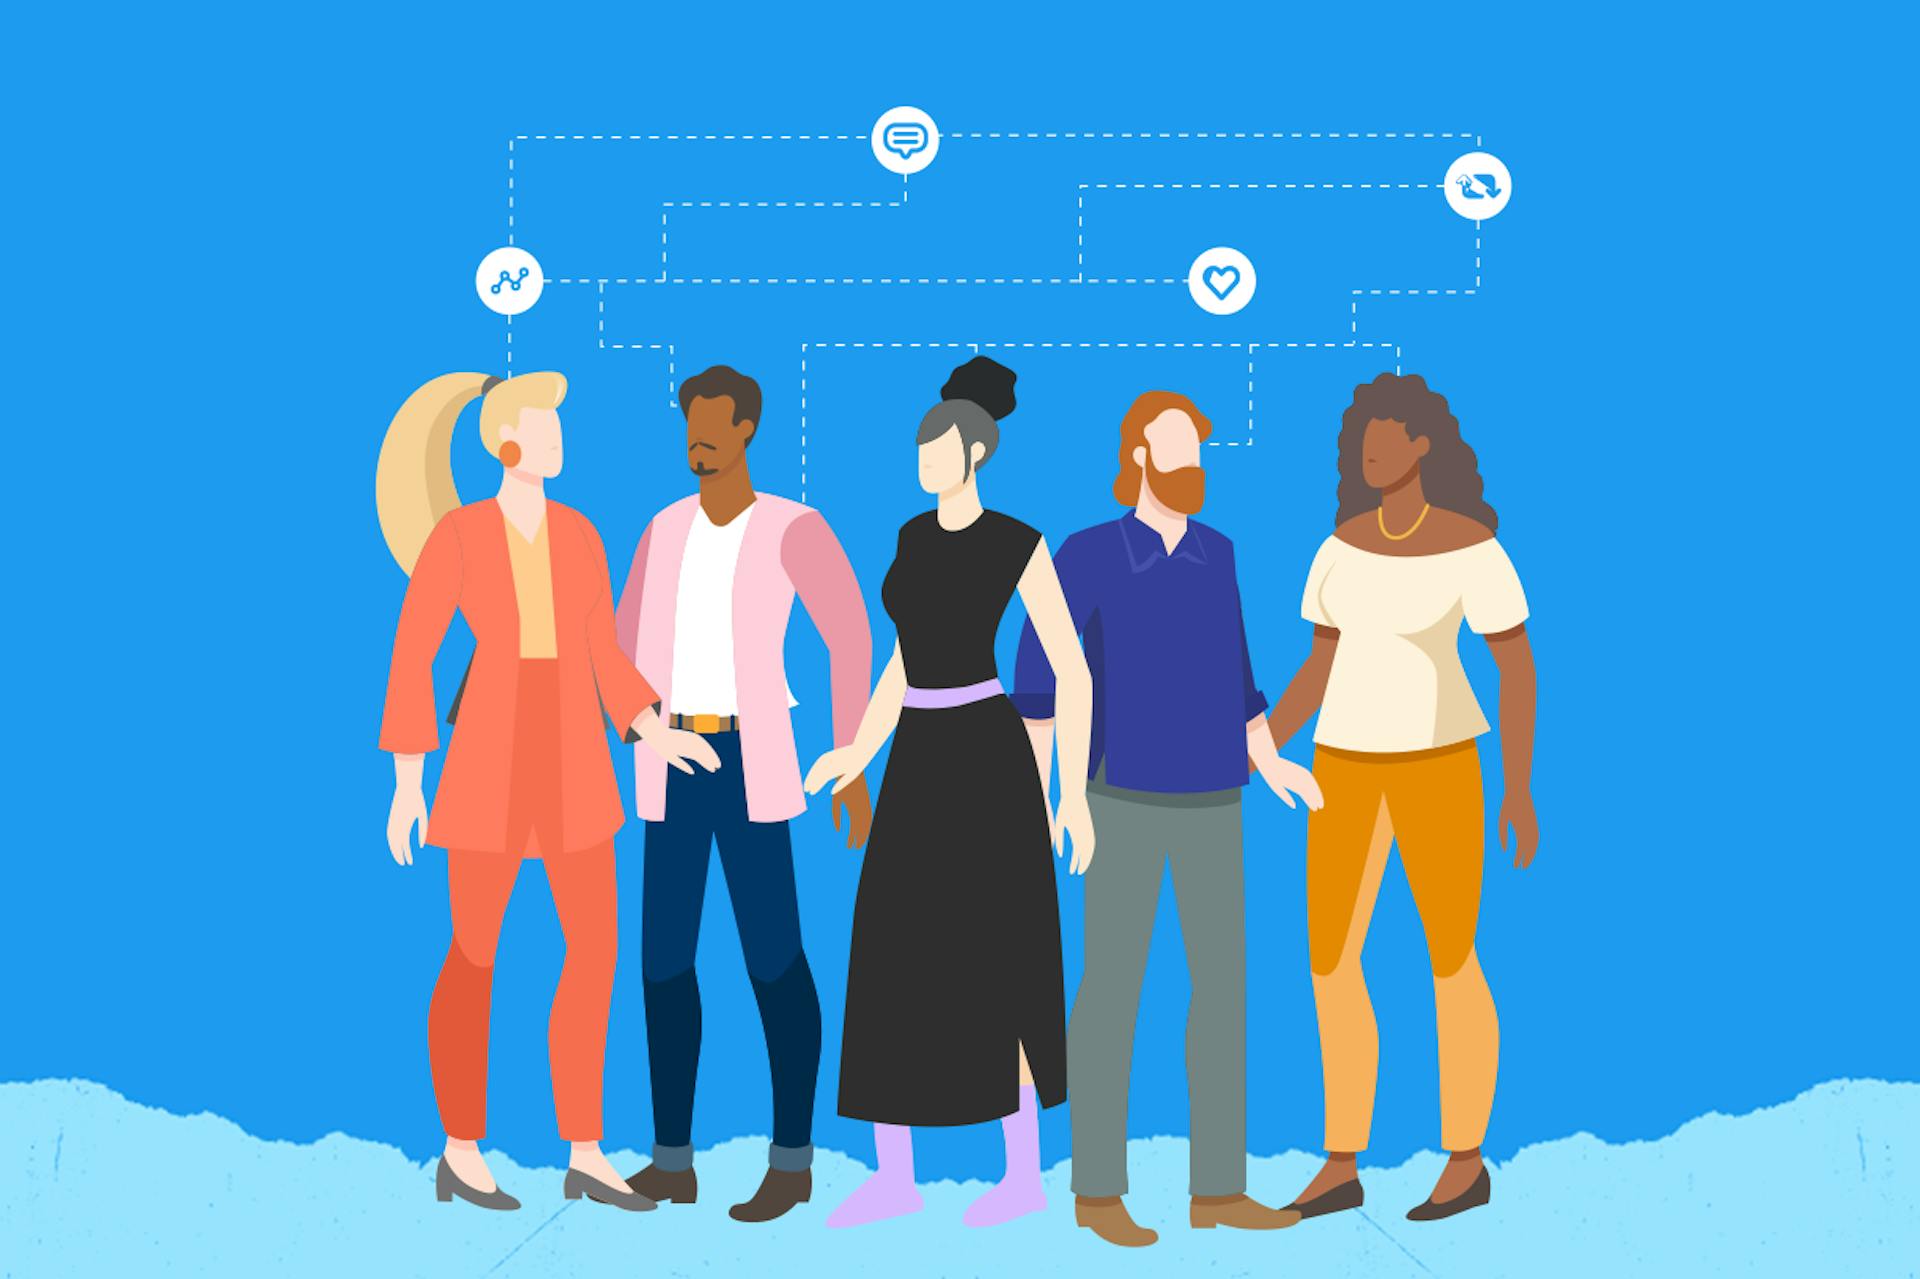 Five illustrated people stand in a group connected by dotted lines and icons, for a blog about Meltwater and Twitter's new fashion report.